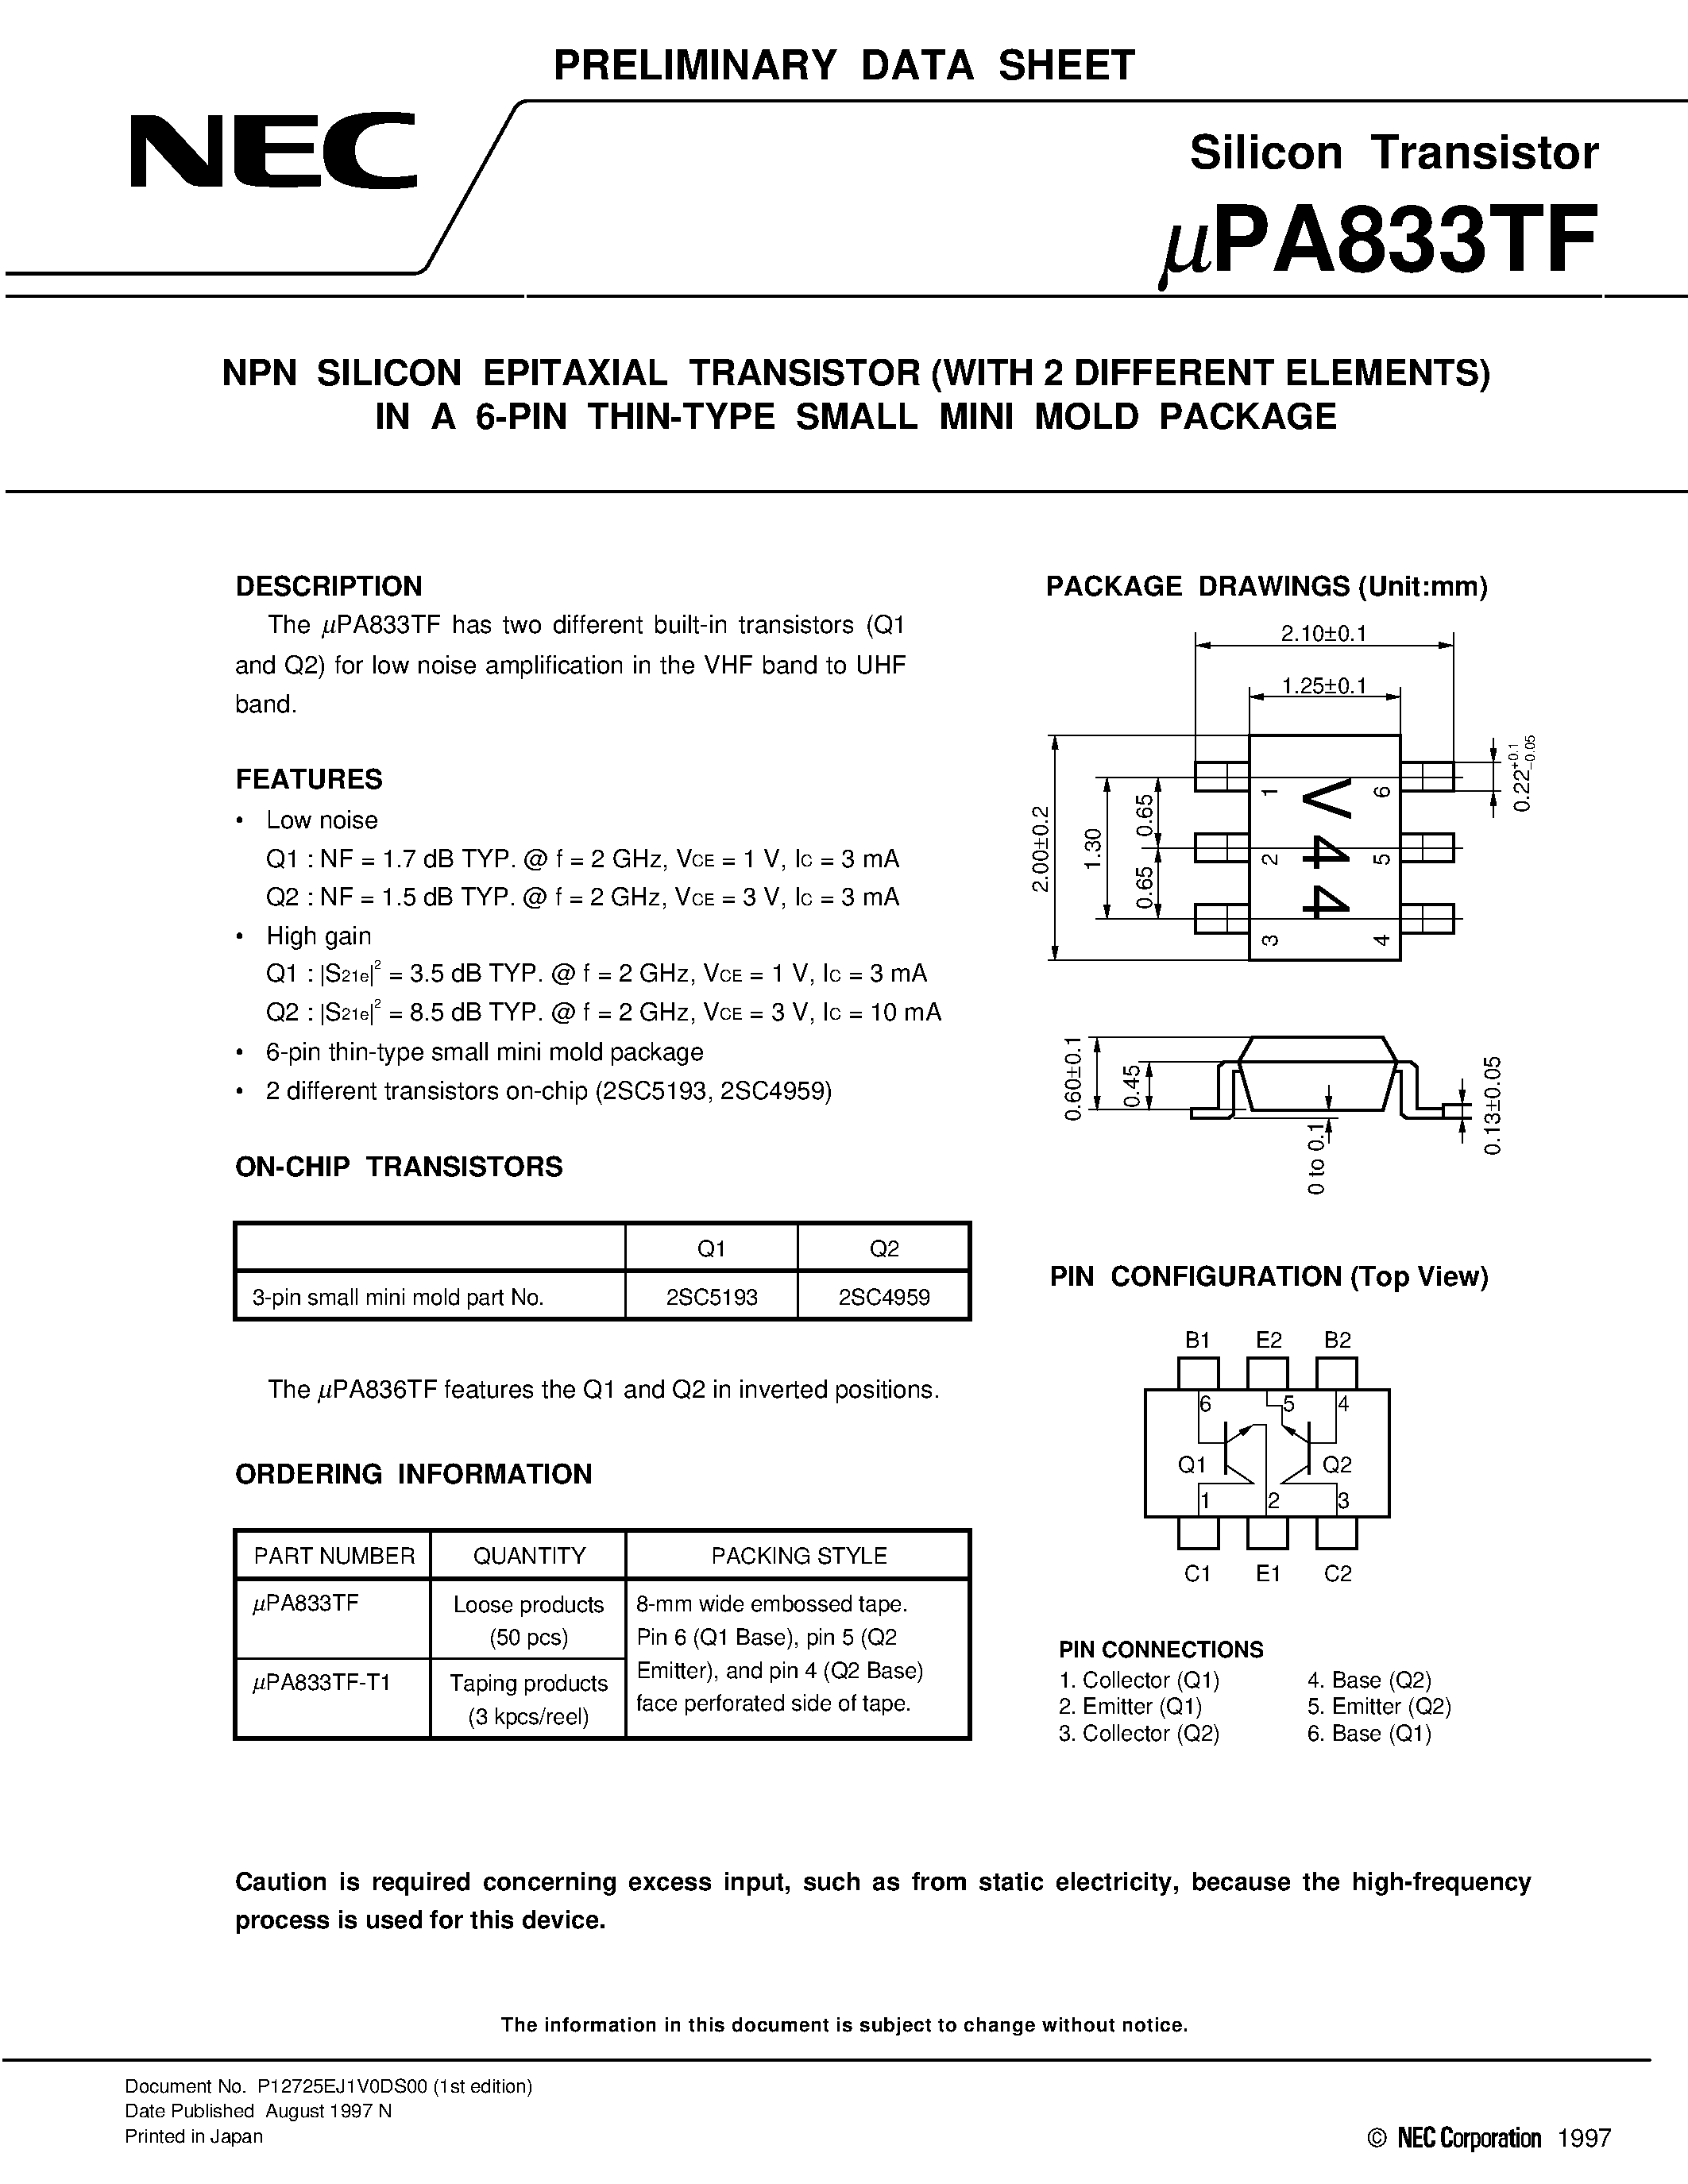 Datasheet UPA833TF - NPN SILICON EPITAXIAL TRANSISTOR WITH 2 DIFFERENT ELEMENTS IN A 6-PIN THIN-TYPE SMALL MINI MOLD PACKAGE page 1